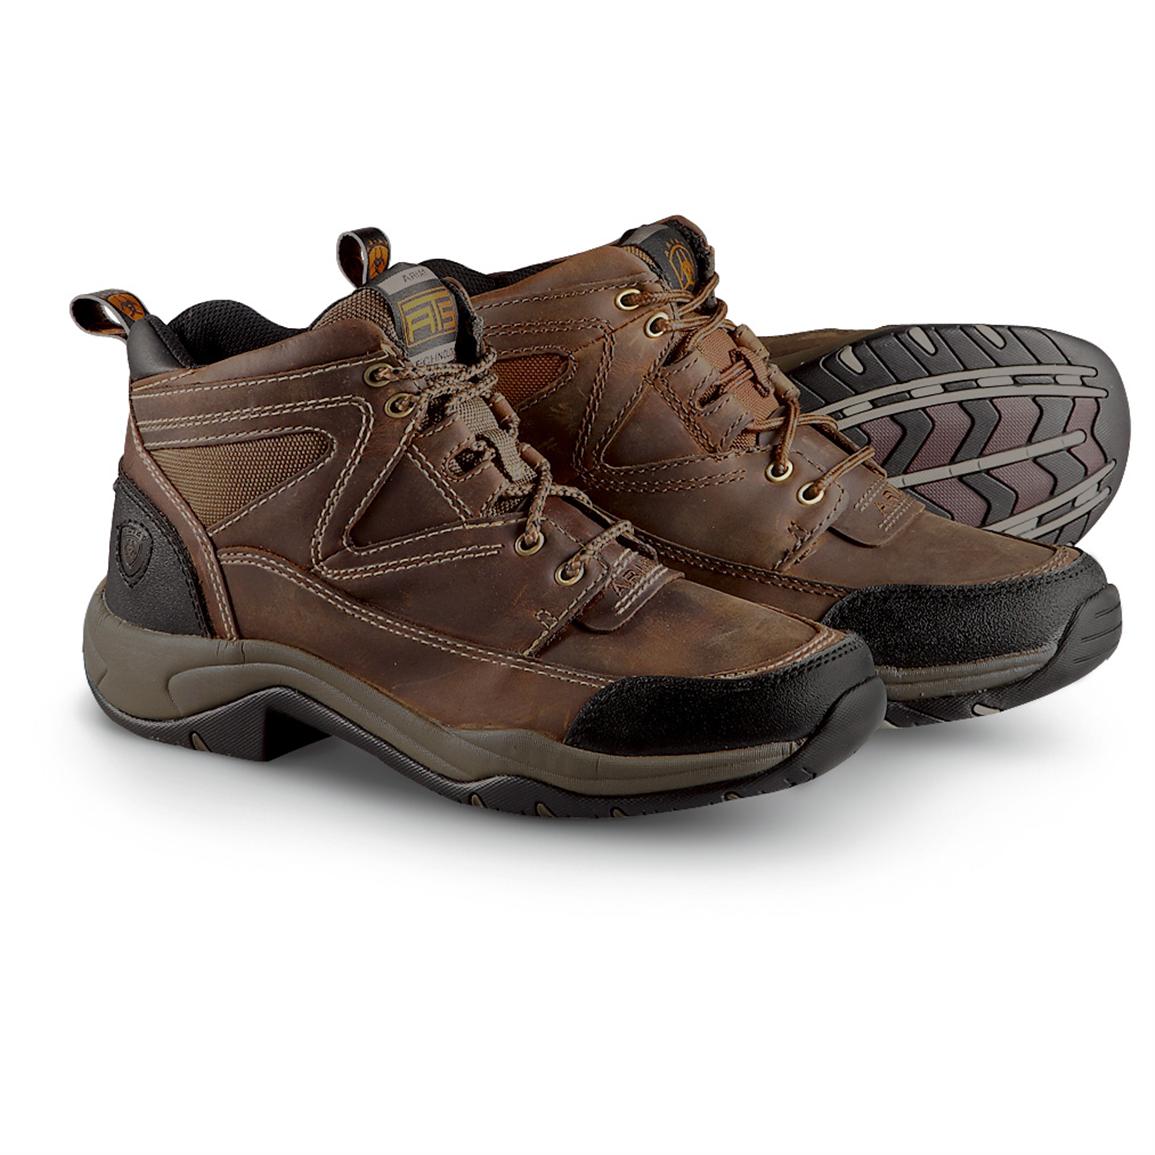 Ariat Boots On Sale - Yu Boots